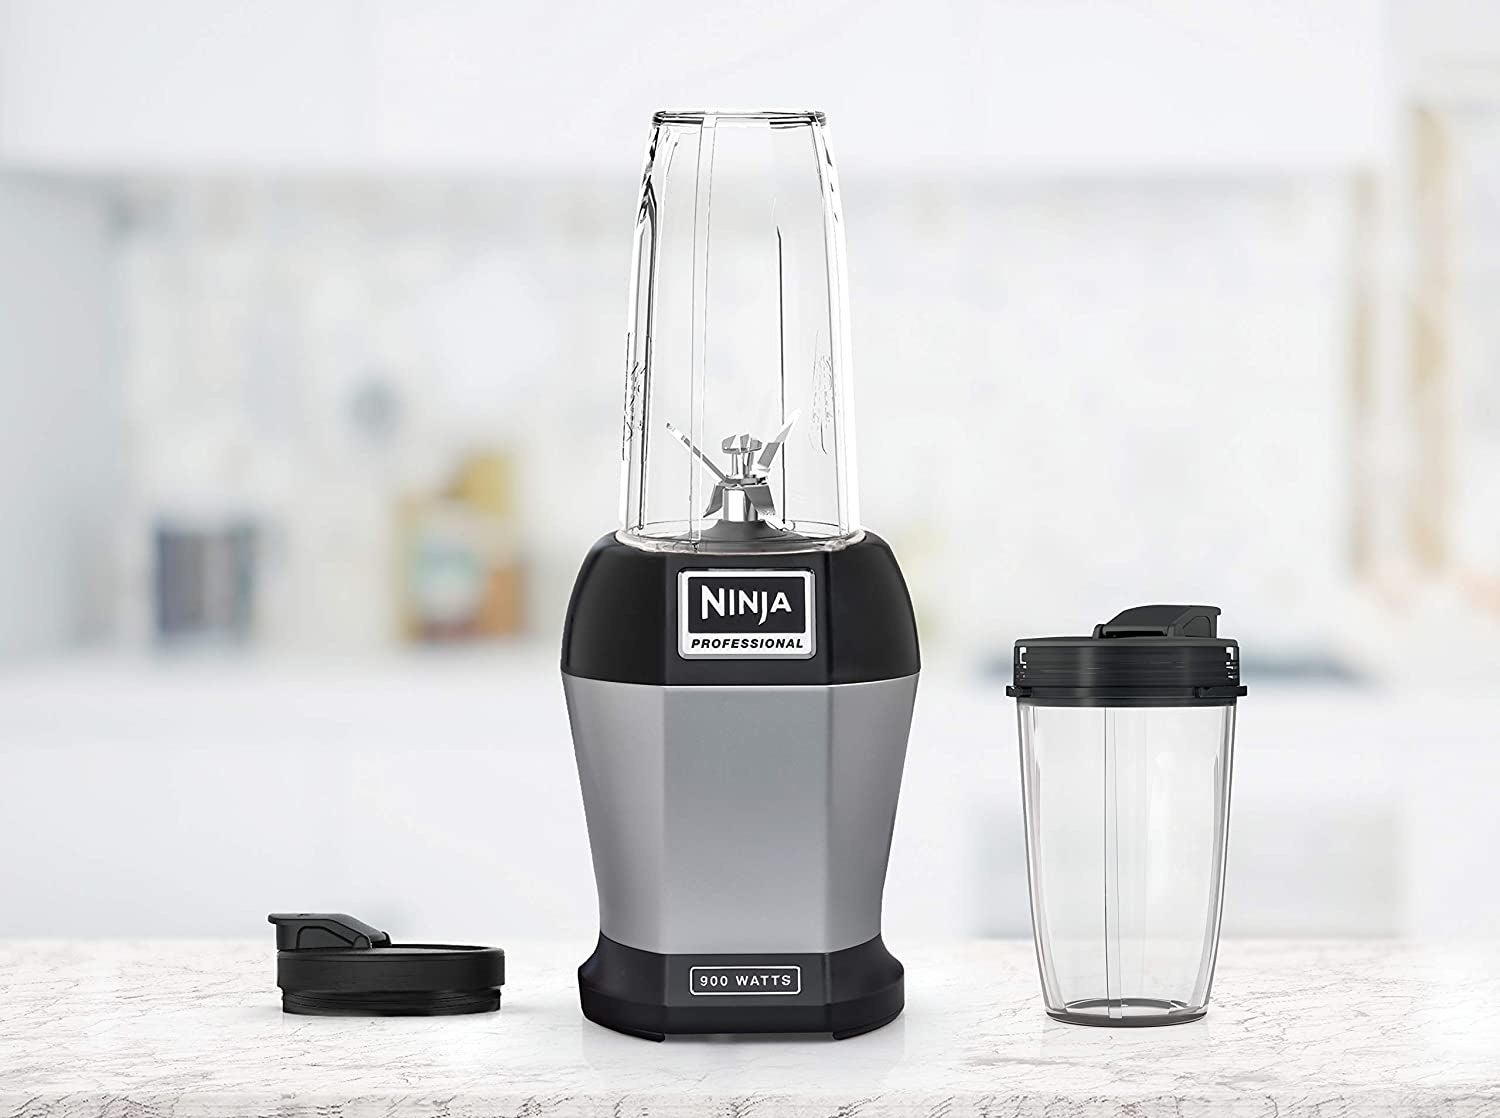 The Ninja blender with two cups and corresponding lids